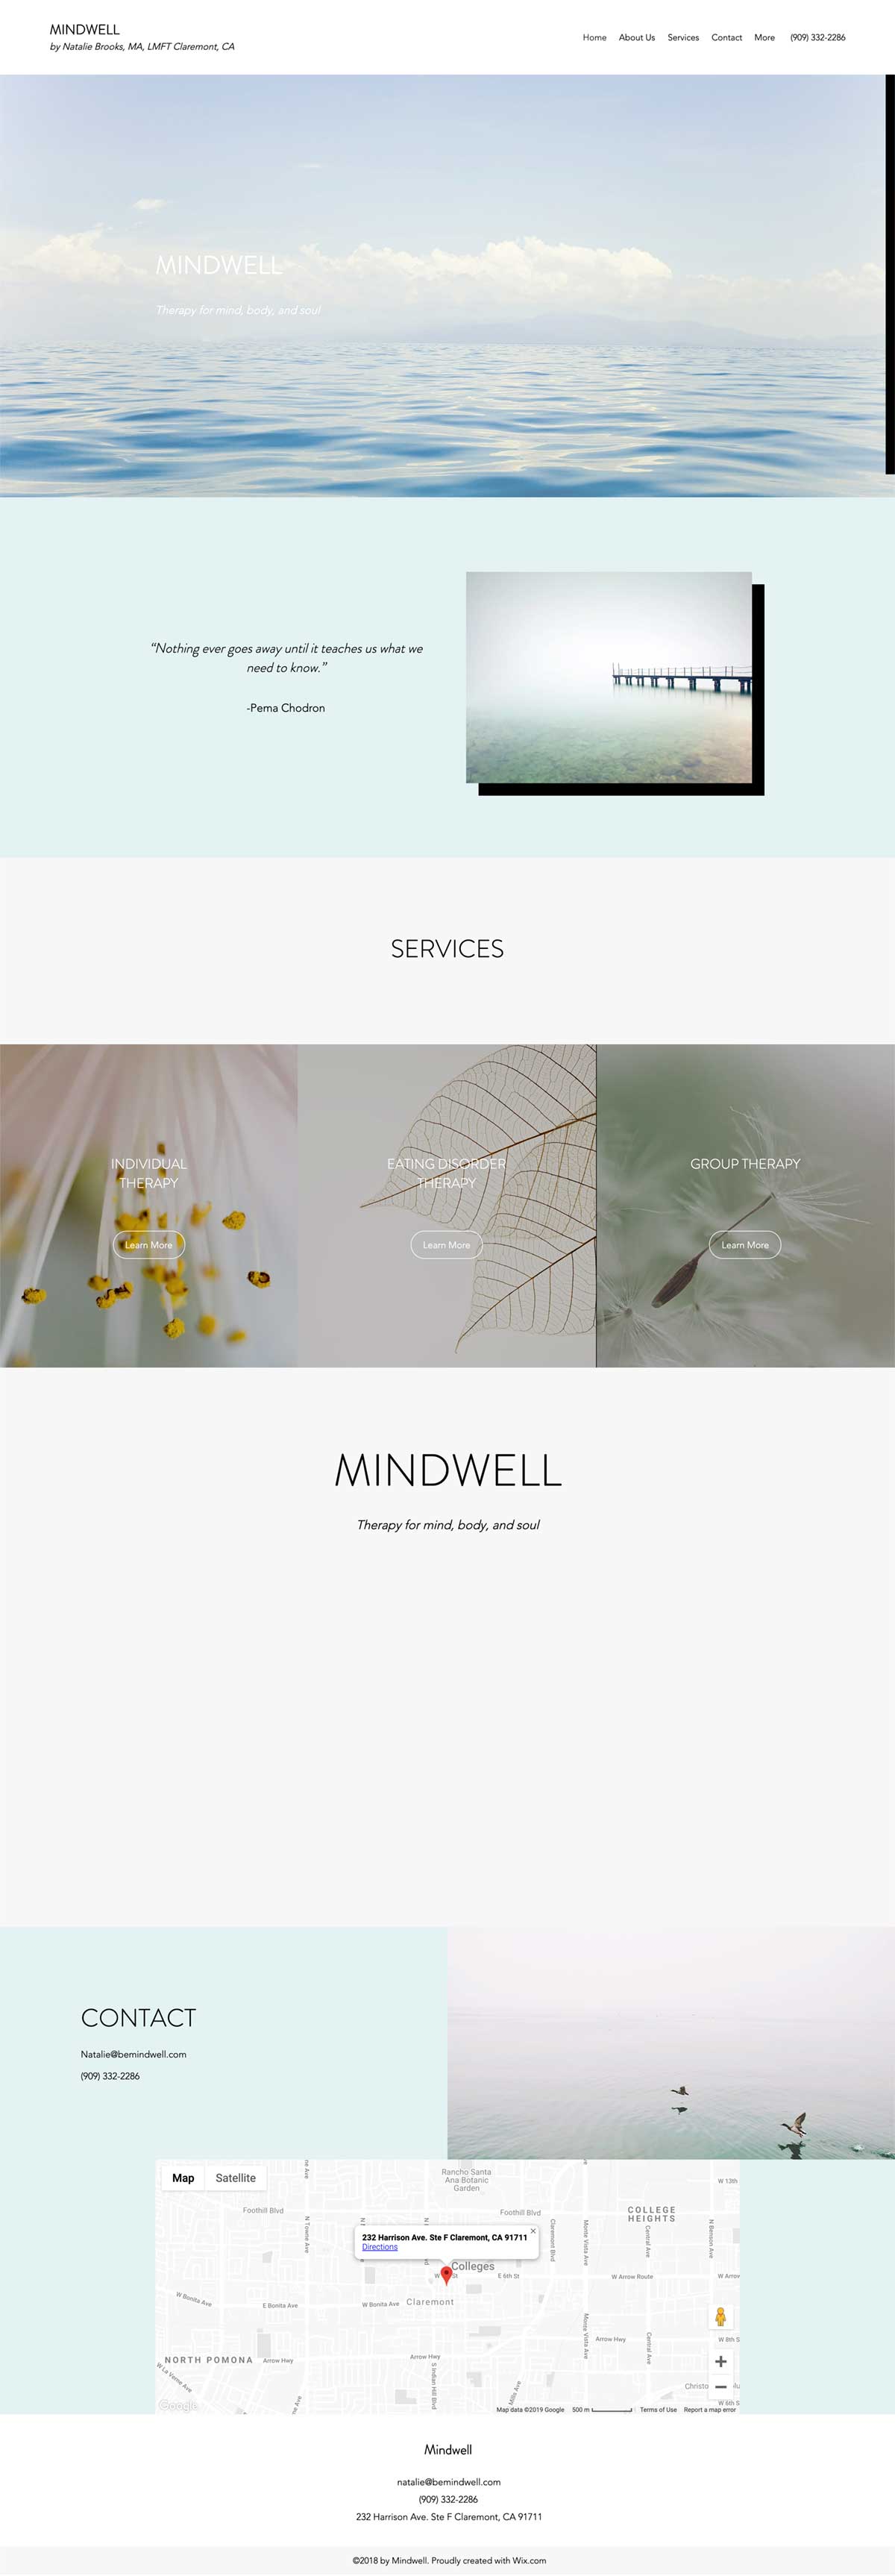 Be Mindwell - a therapist website sample